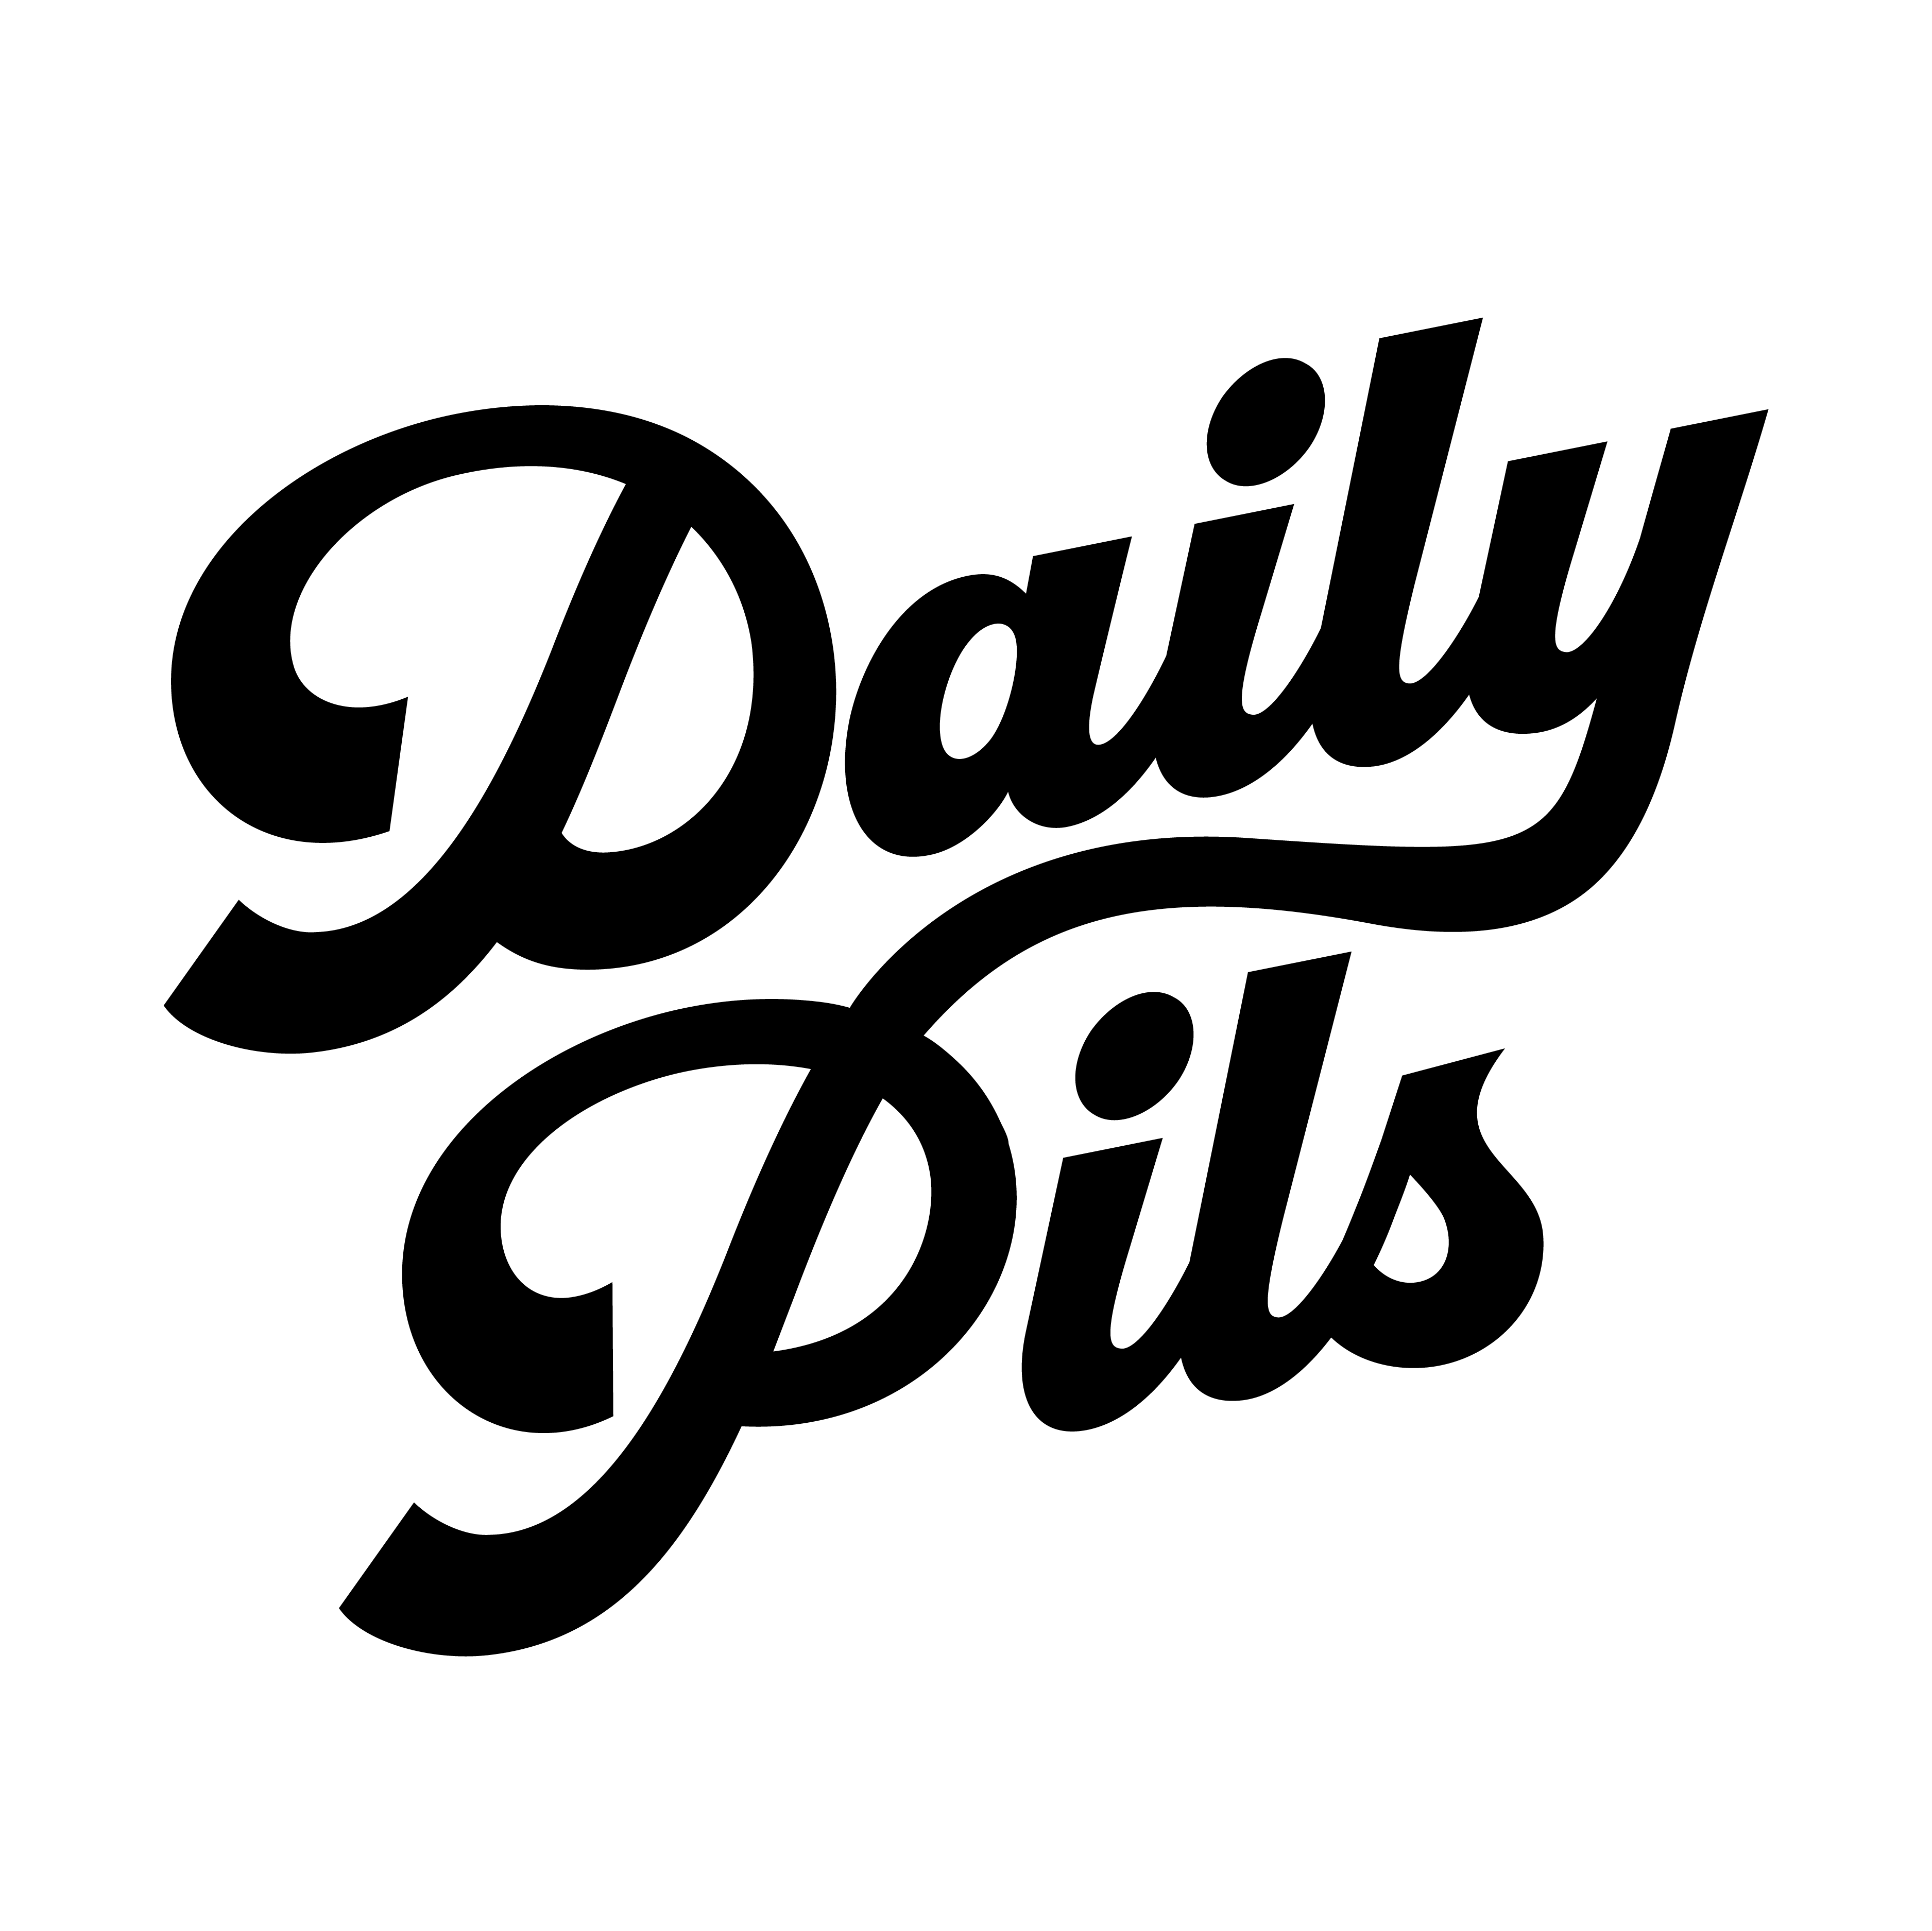 Daily Pils - Custom Script logo design by logo designer Brethren Design Co. for your inspiration and for the worlds largest logo competition